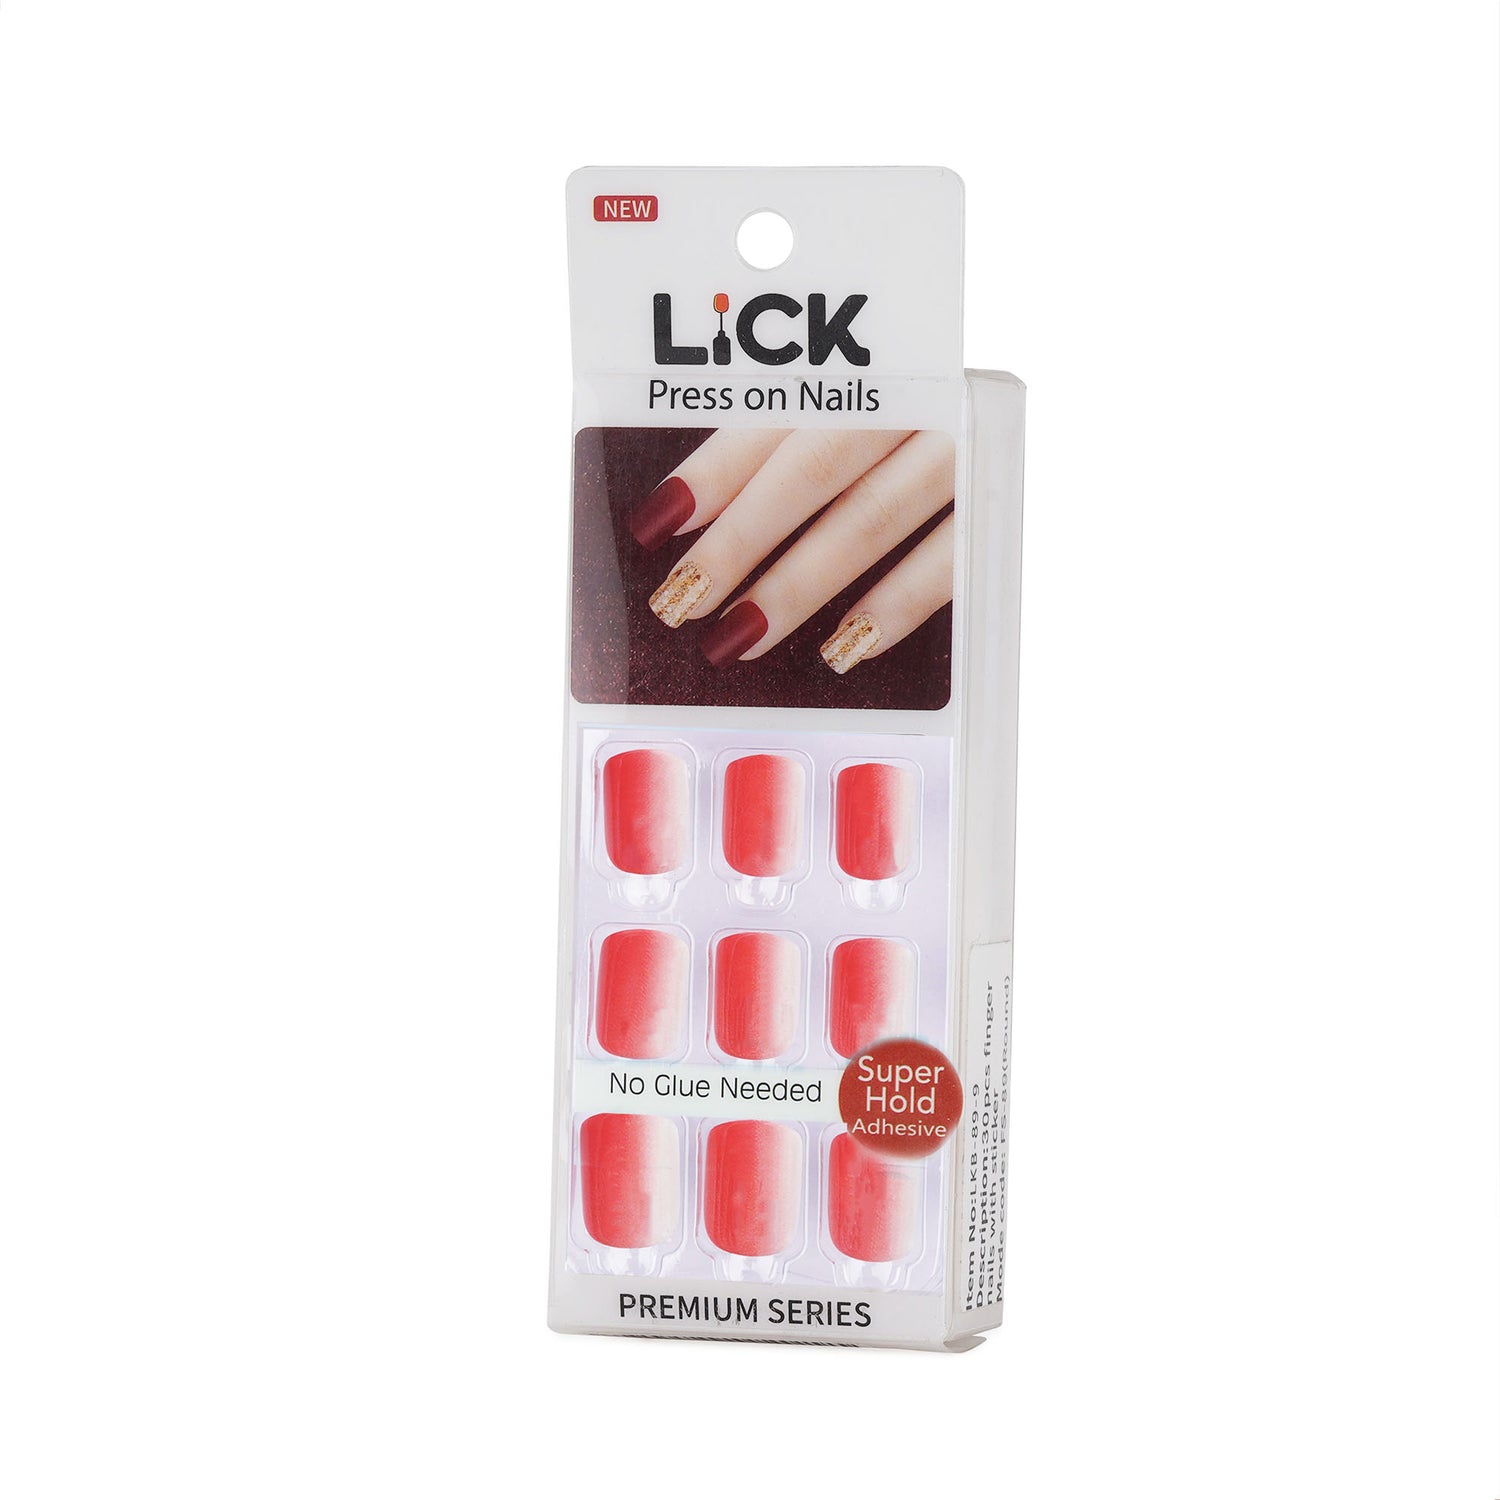 Amazon.com: XCREANDO Coral Pink Press On Nails Short Oval,Xcreando Almond Fake  Nails Glue on Nails Short,Acrylic Nails Press ons,Gel Nails False Nails  Short,Stick on Nails for Women and Girls in 24 PCS :